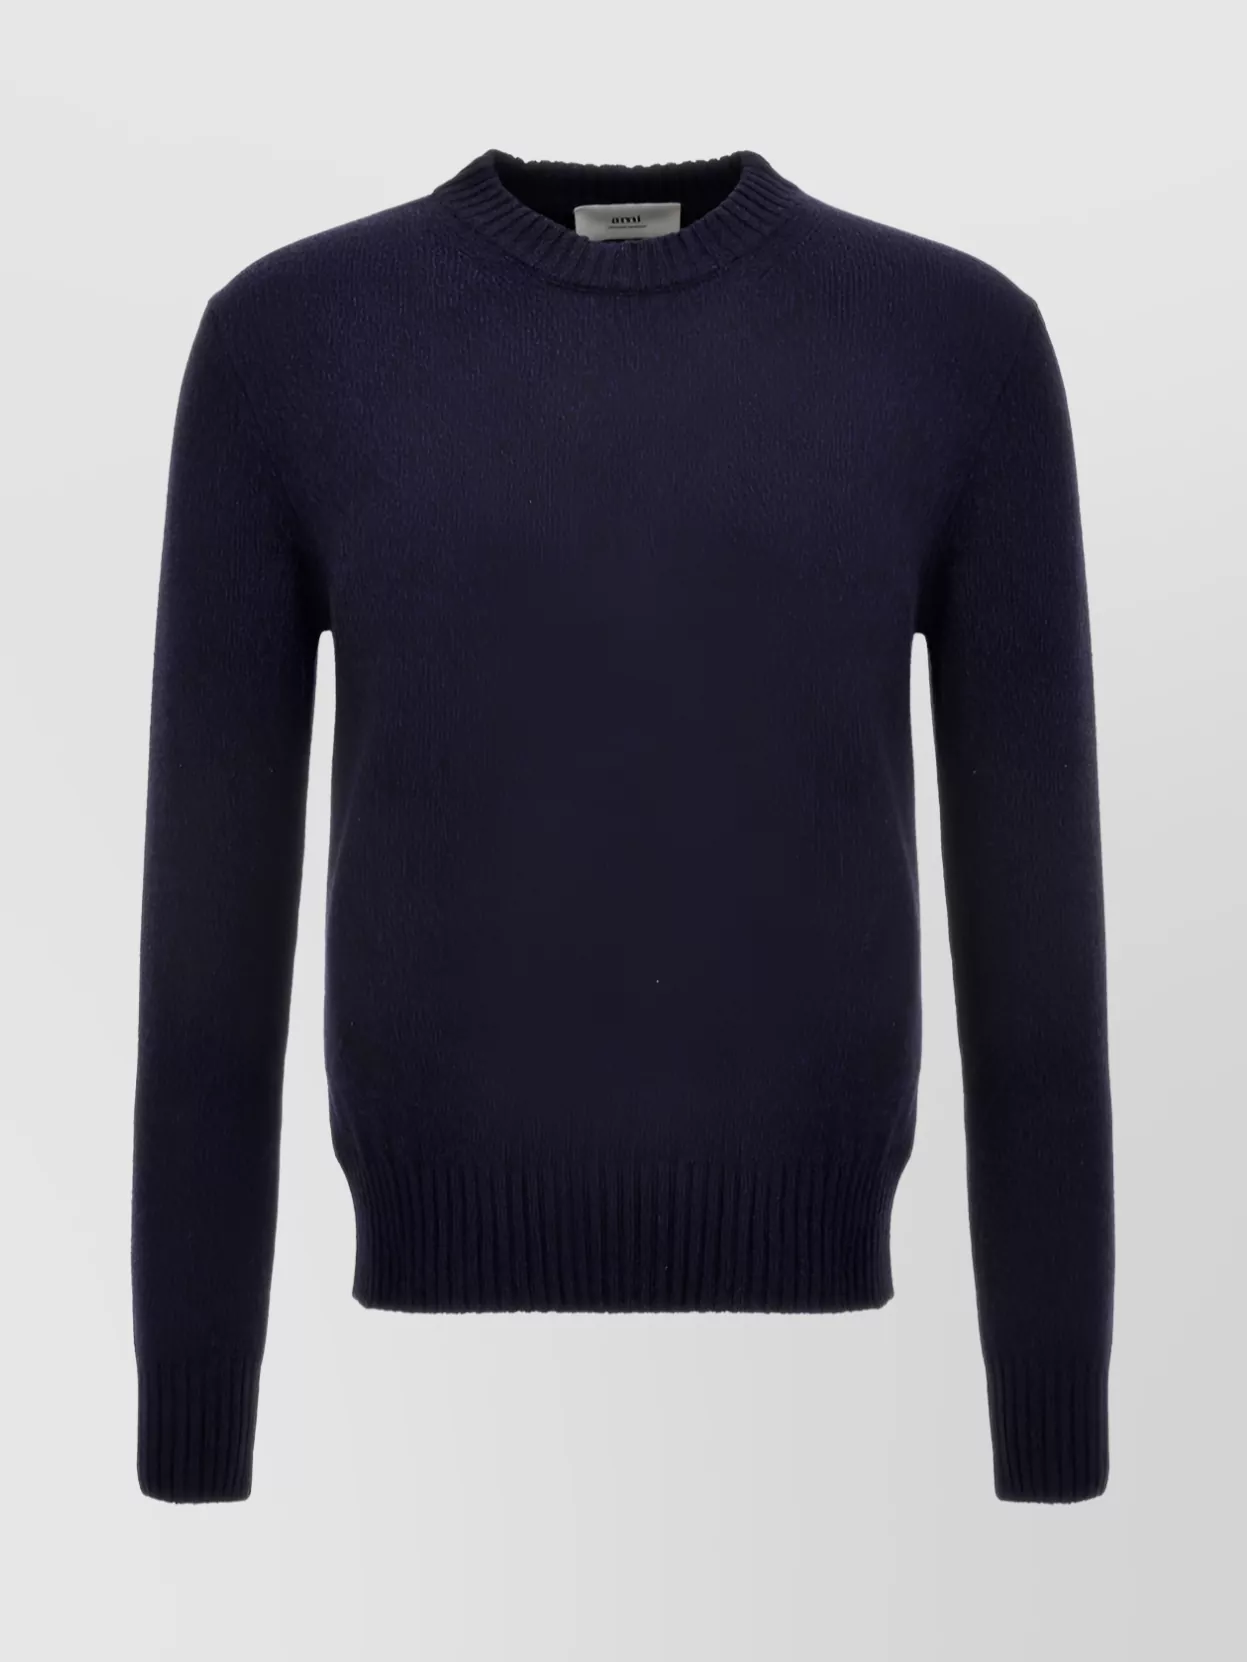 Shop Ami Alexandre Mattiussi Ribbed Crewneck Sweater With Hem And Cuffs In Blue